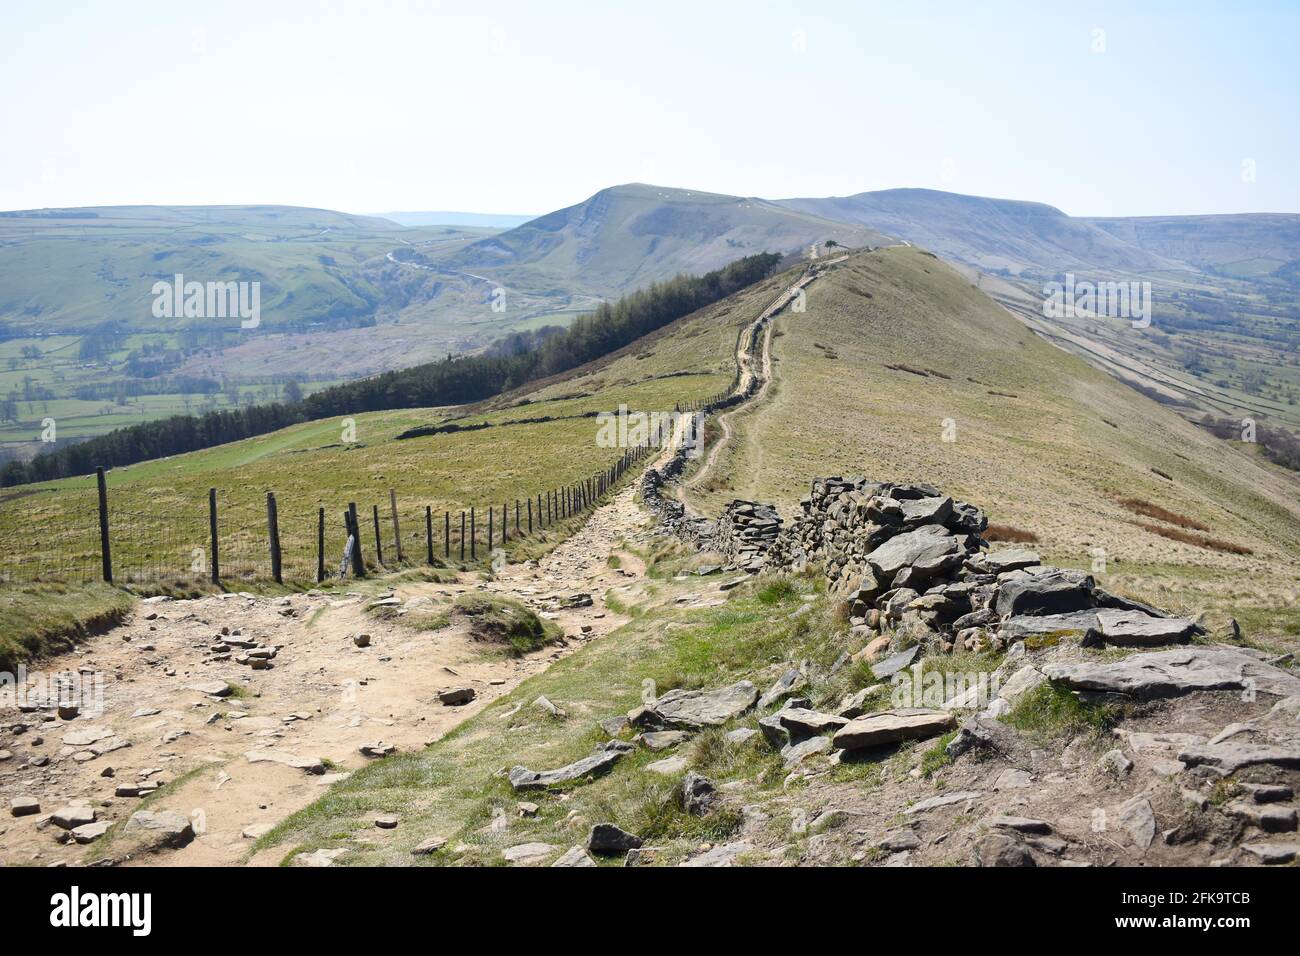 Footpath leading into the distance towards Mam Tor in the background. Mam Tor is a 517m hill near Castleton in the High Peak District, Derbyshire, UK. Stock Photo